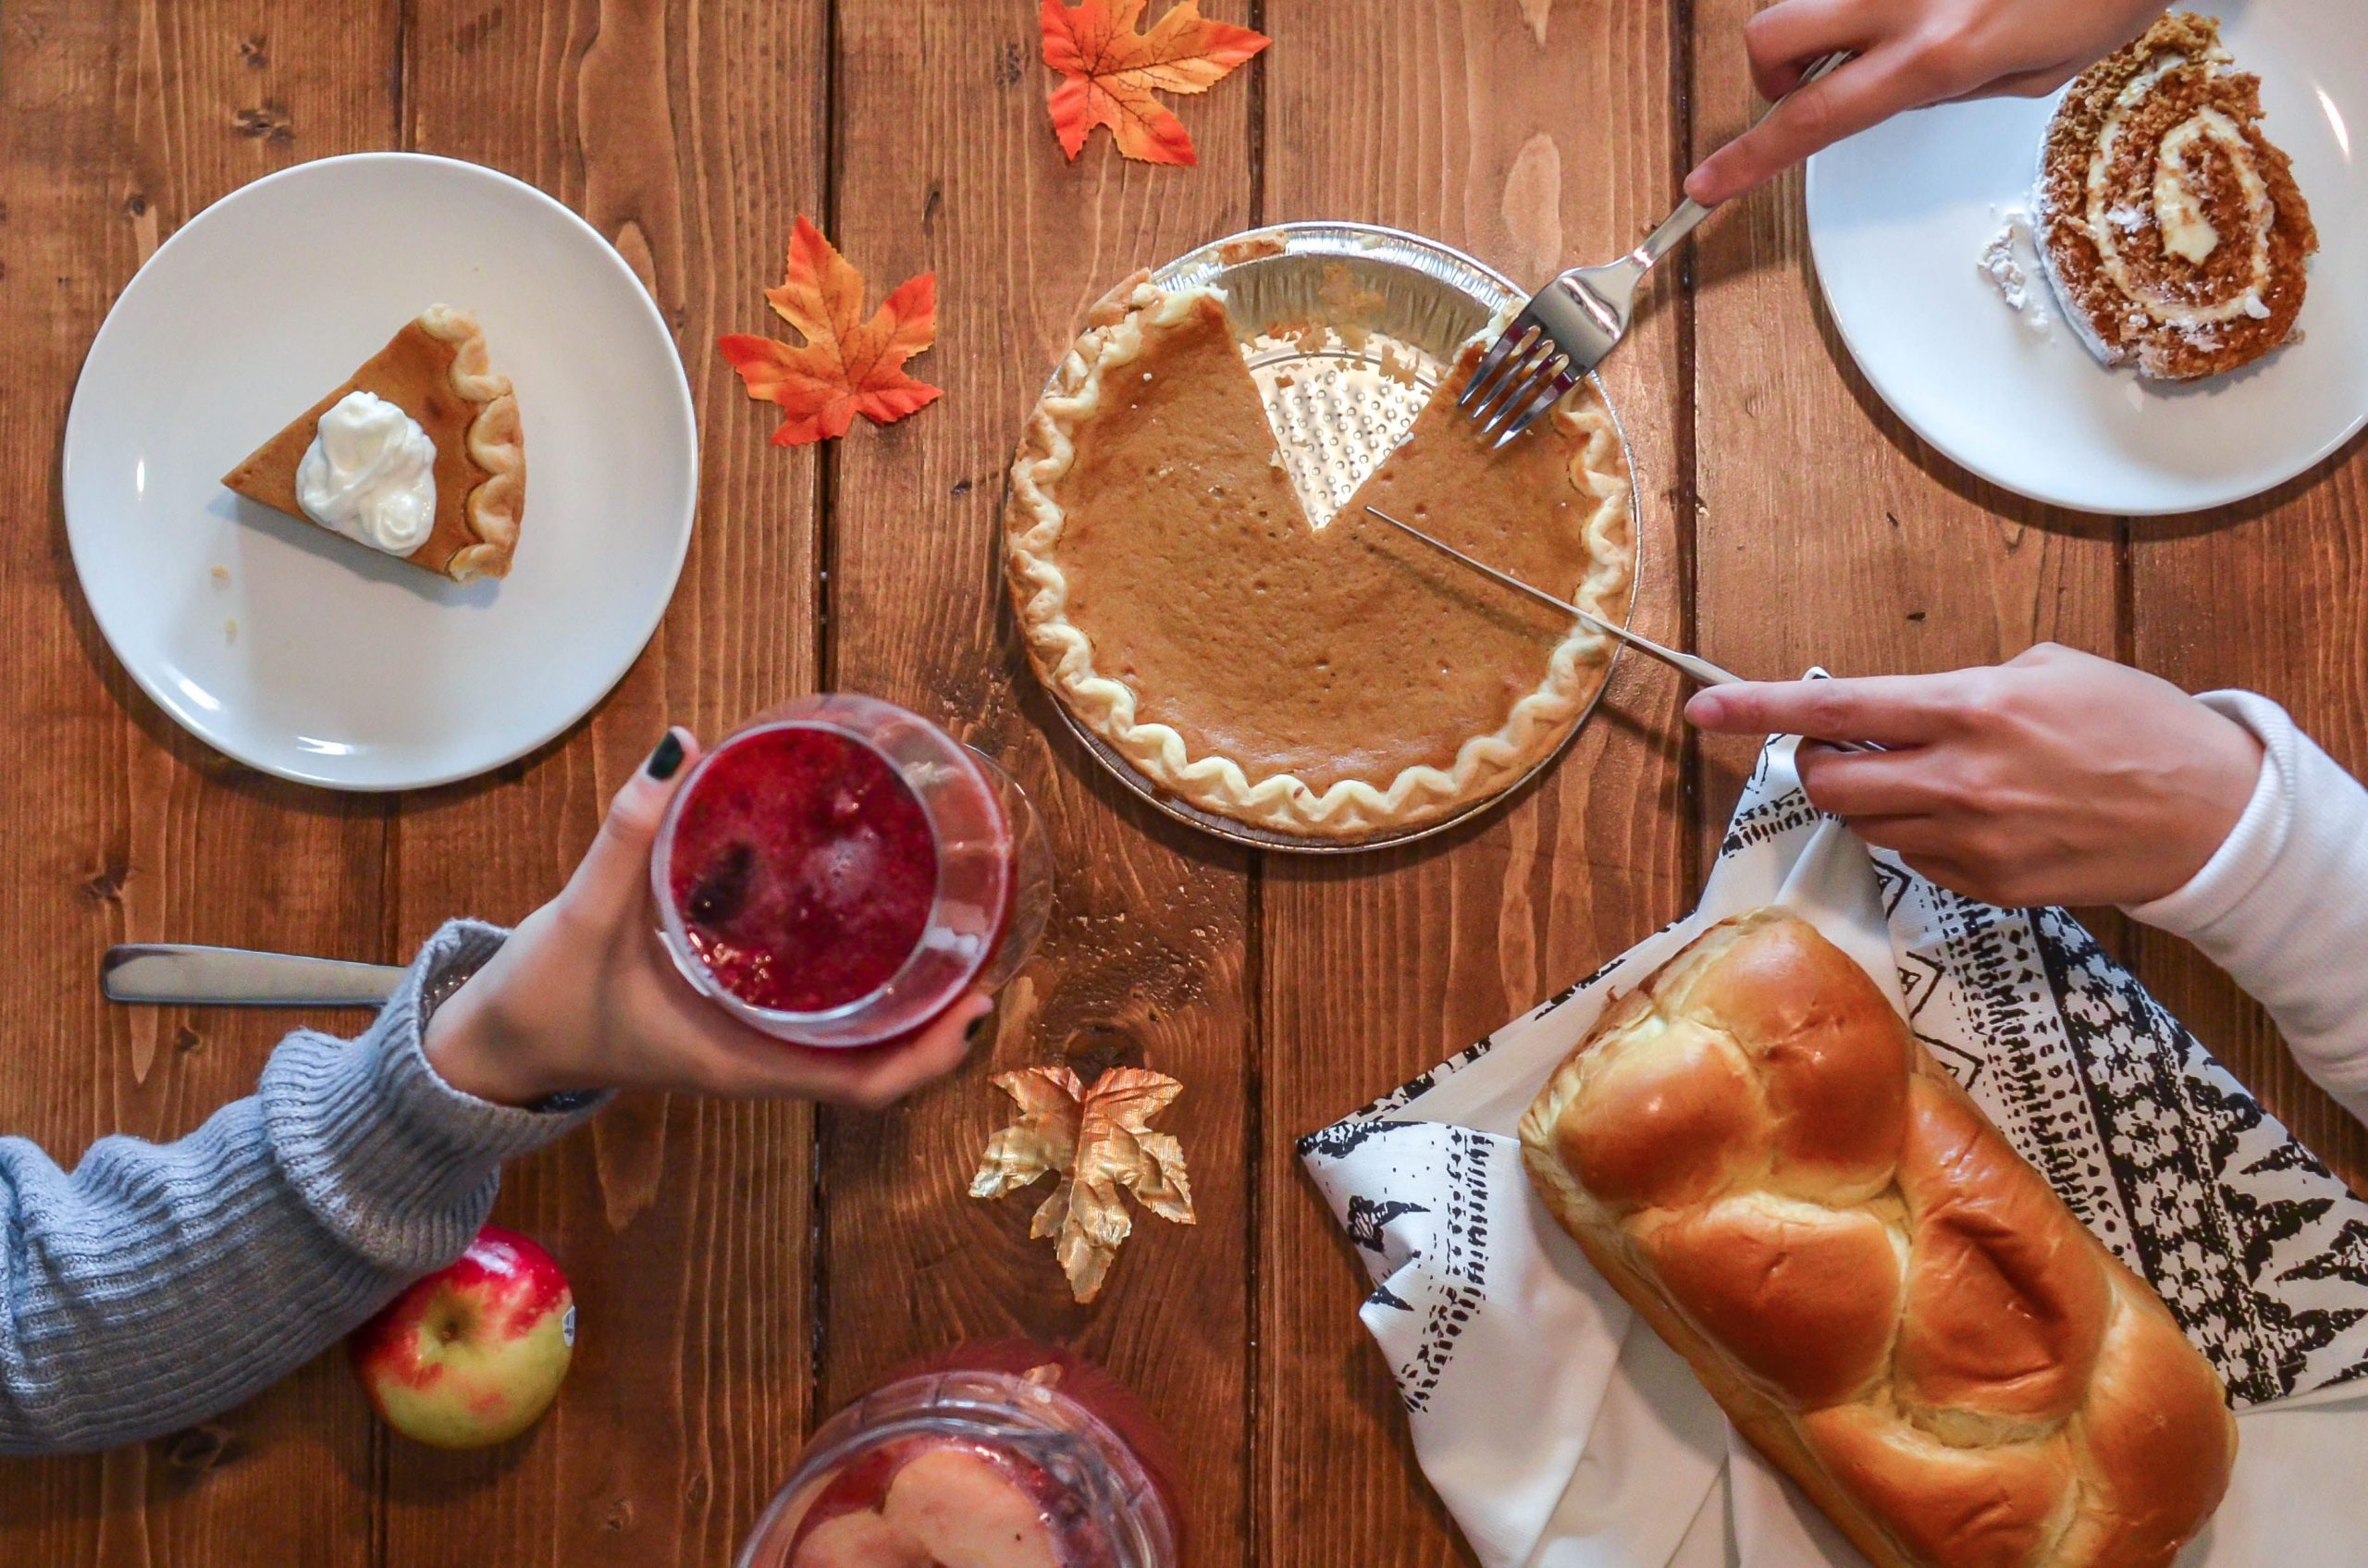 Order your Thanksgiving dinner from these authentic restaurants